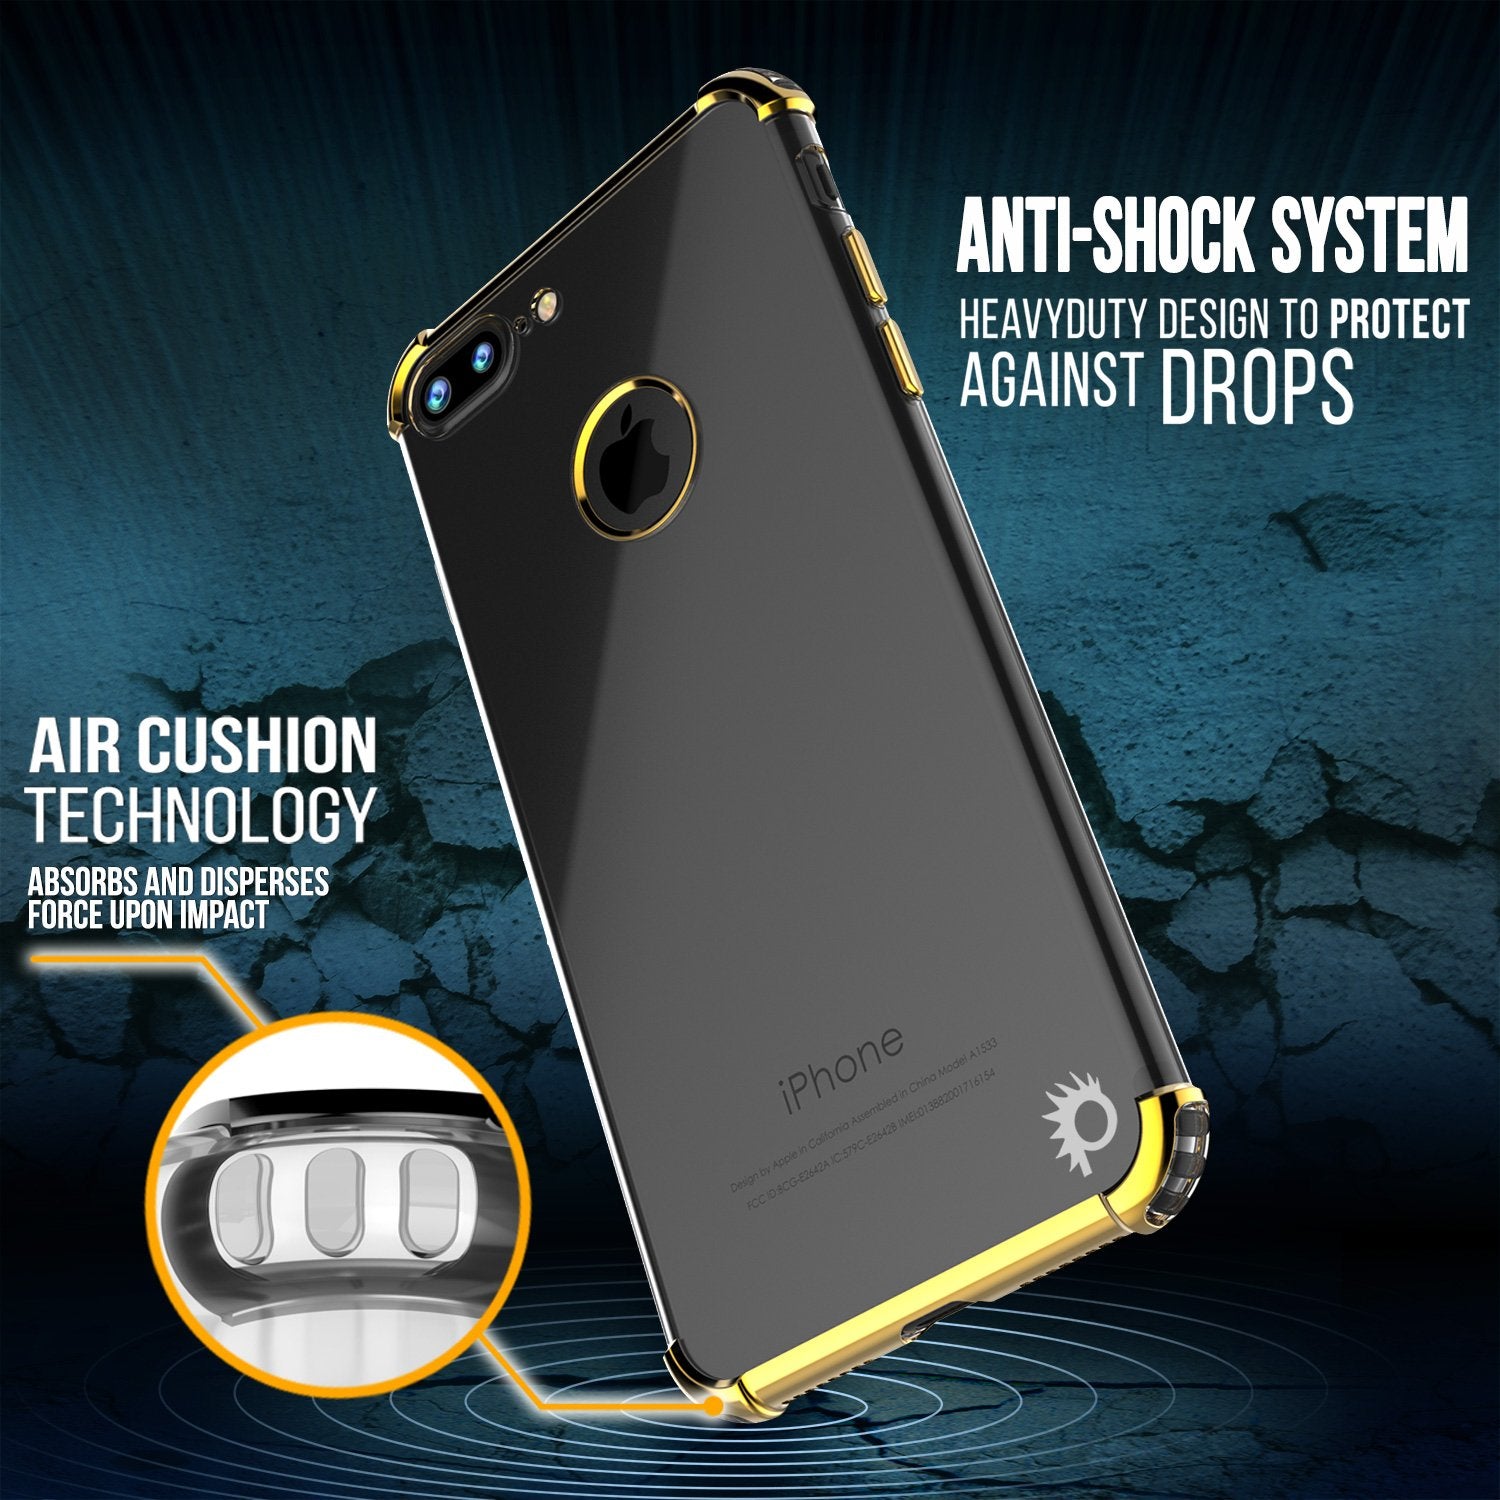 iPhone 8 PLUS Case, Punkcase [BLAZE SERIES] Protective Cover W/ PunkShield Screen Protector [Shockproof] [Slim Fit] for Apple iPhone 7/8/6/6s PLUS [Gold]